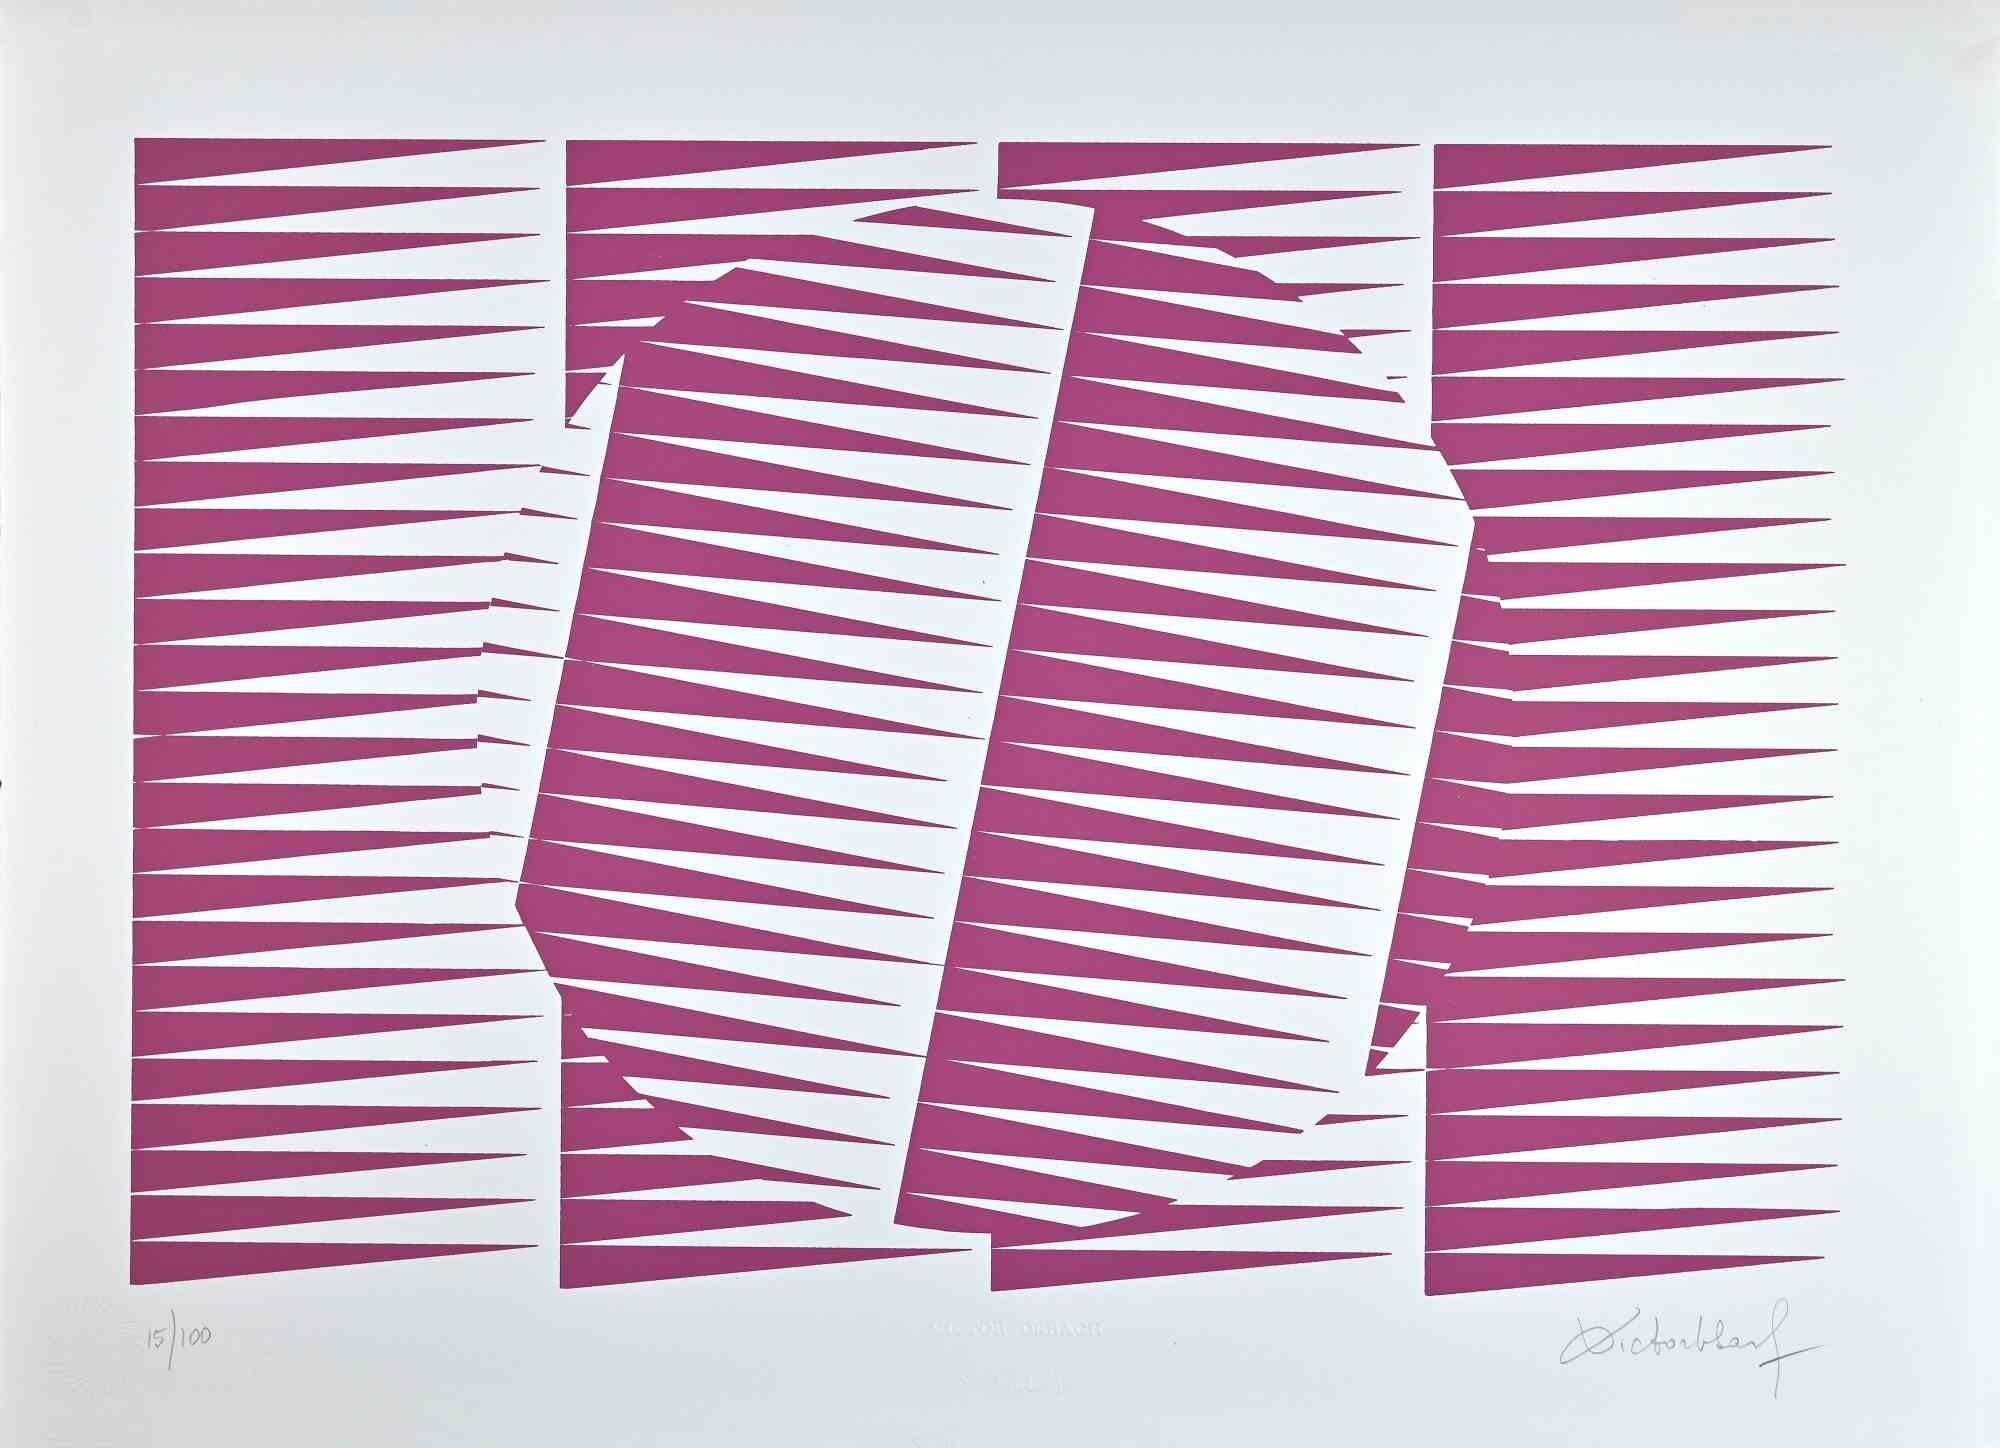 Abstract Pink Composition - Screen Print by Victor Debach - 1970s